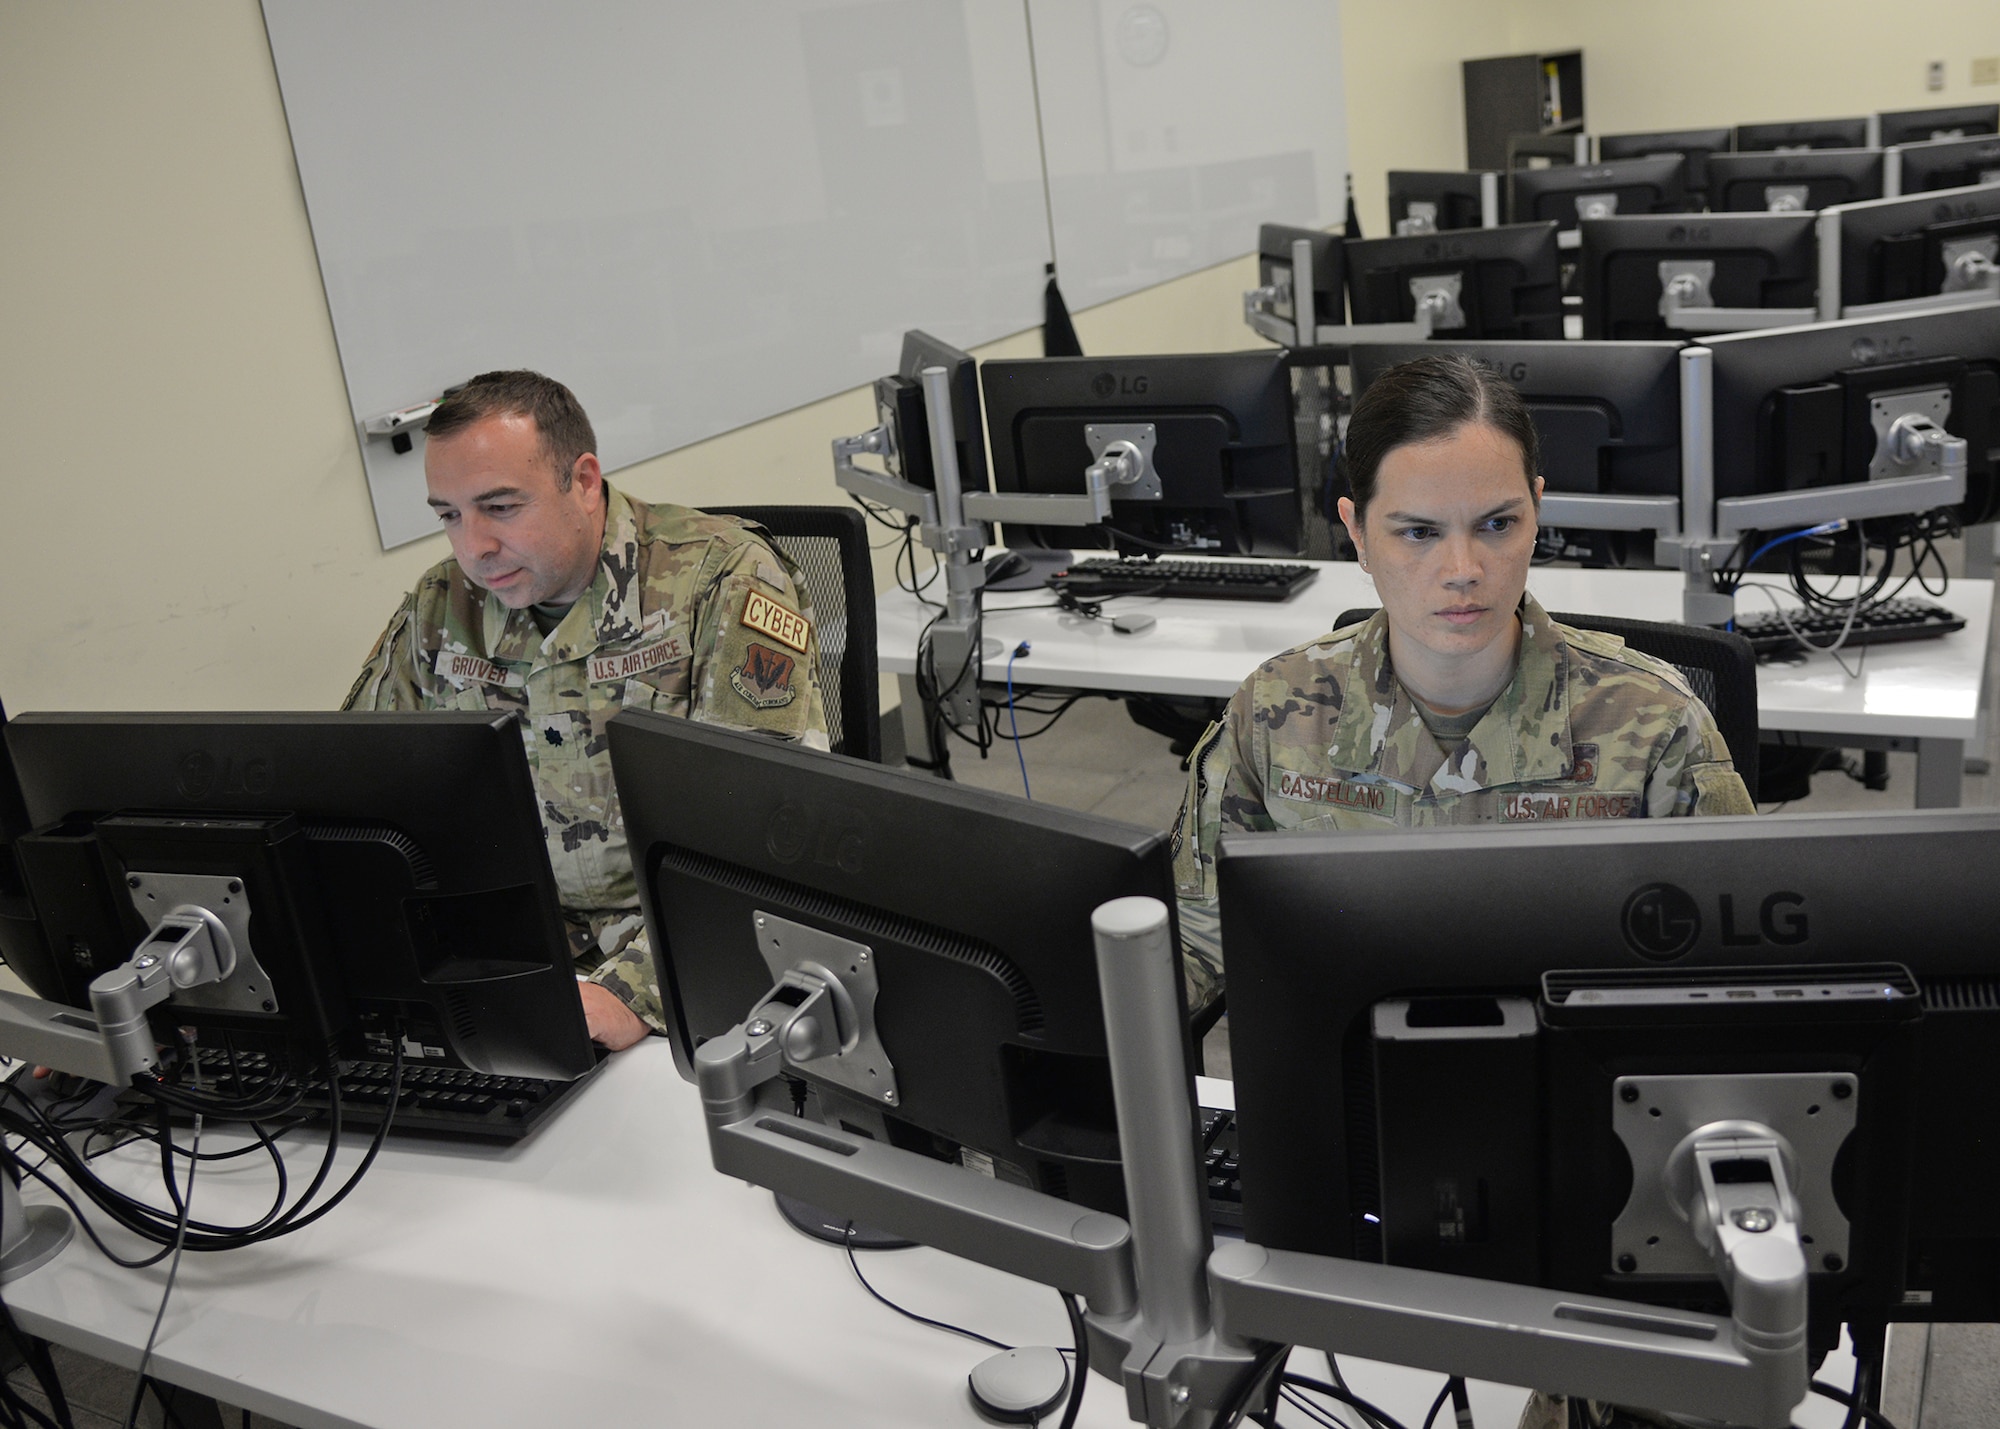 Airmen assigned to the 175th Cyberspace Operations Group work at computer terminals at Martin State Air National Guard Base, Middle River, Maryland on June 20, 2023.